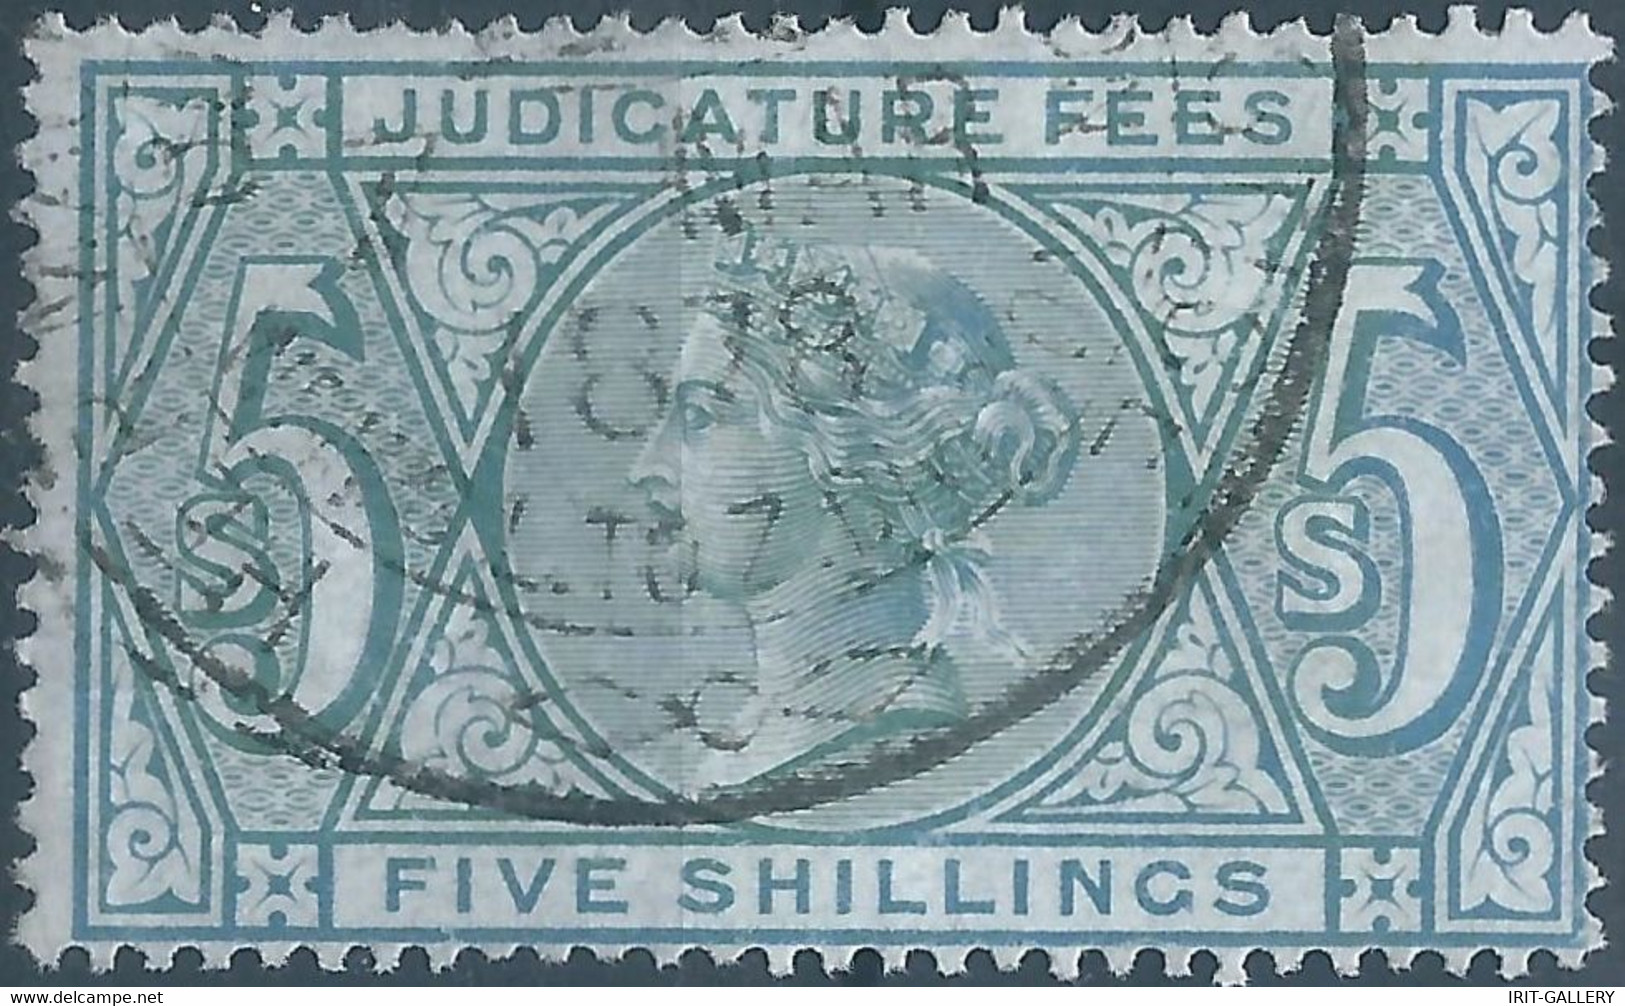 Great Britain-ENGLAND,Queen Victoria,1880-1900 Revenue Stamp Tax Fiscal,JUDICATURE FEES, 5 Shillings,Used - Fiscaux